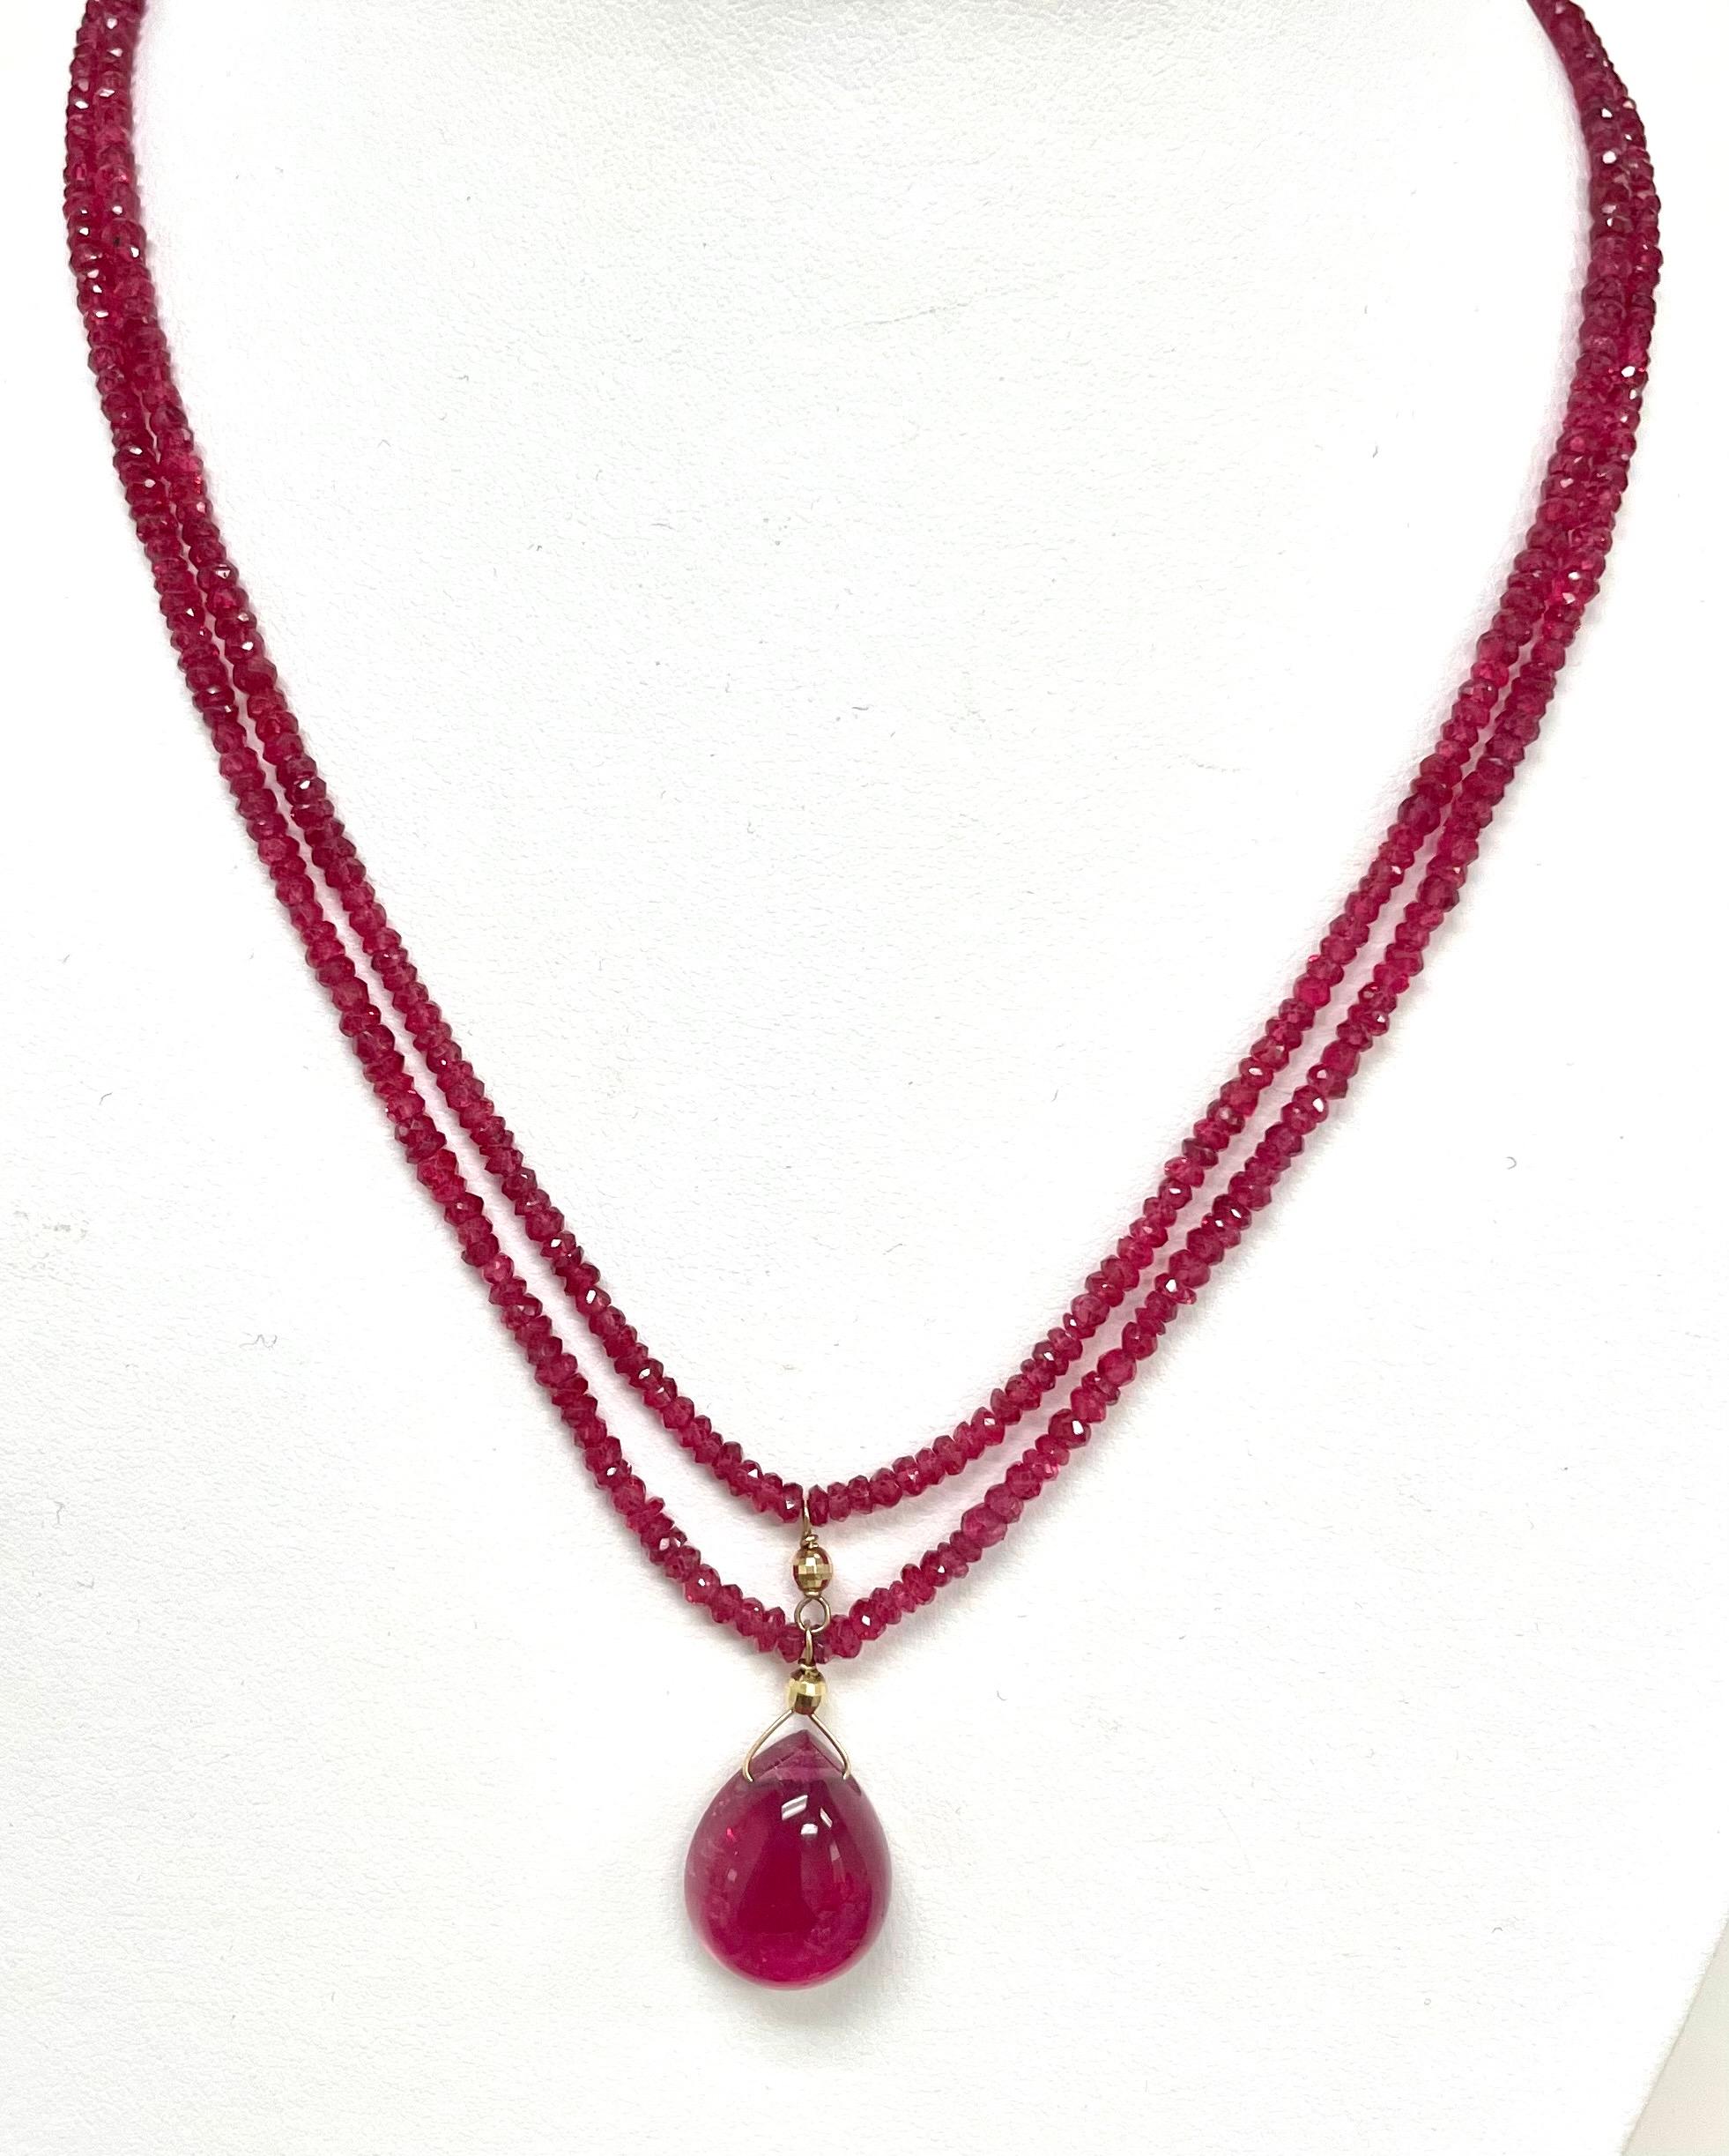 Cabochon Hot Pink Spinel with Red Rubellite Tourmaline Pendant Double Strand Necklace For Sale